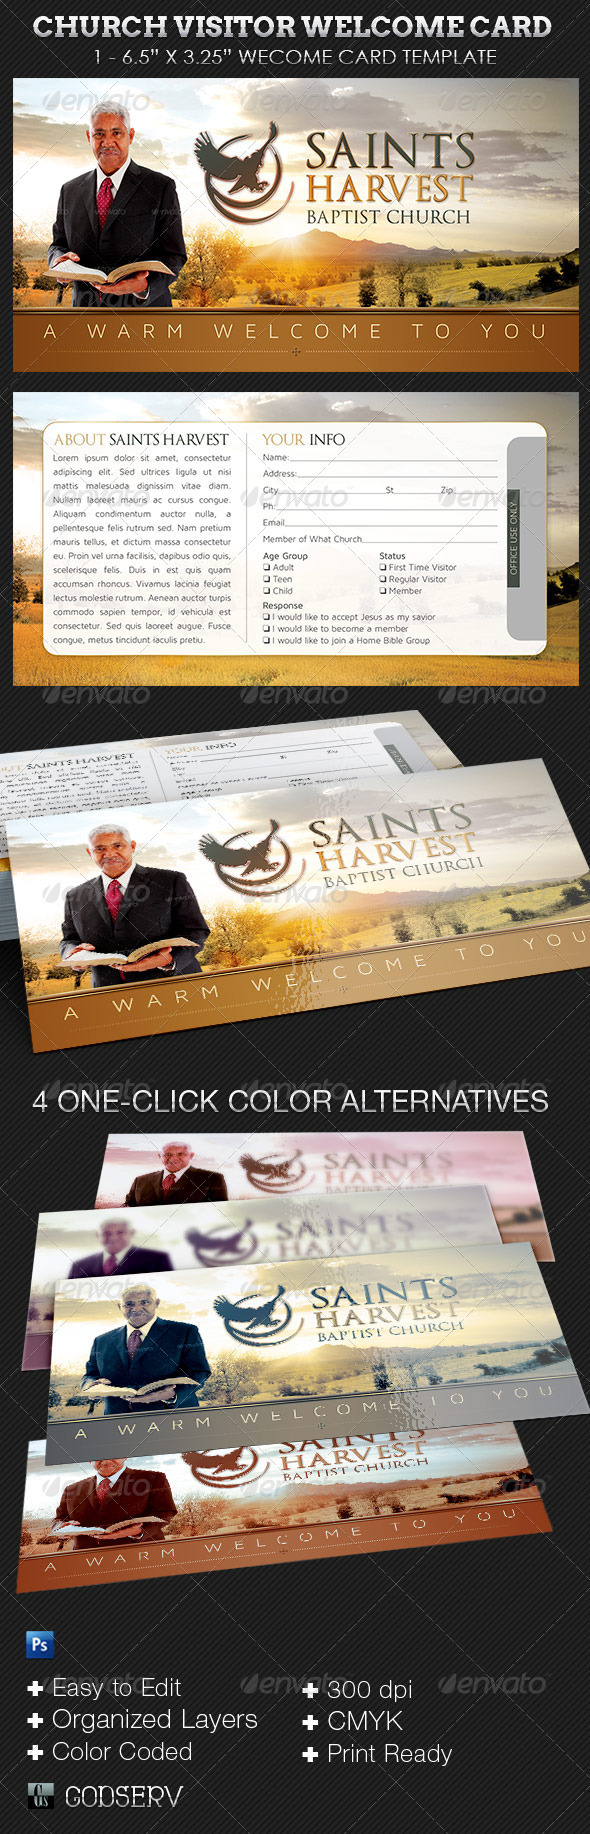 Church Visitor Welcome Card Template on Behance Throughout Church Visitor Card Template